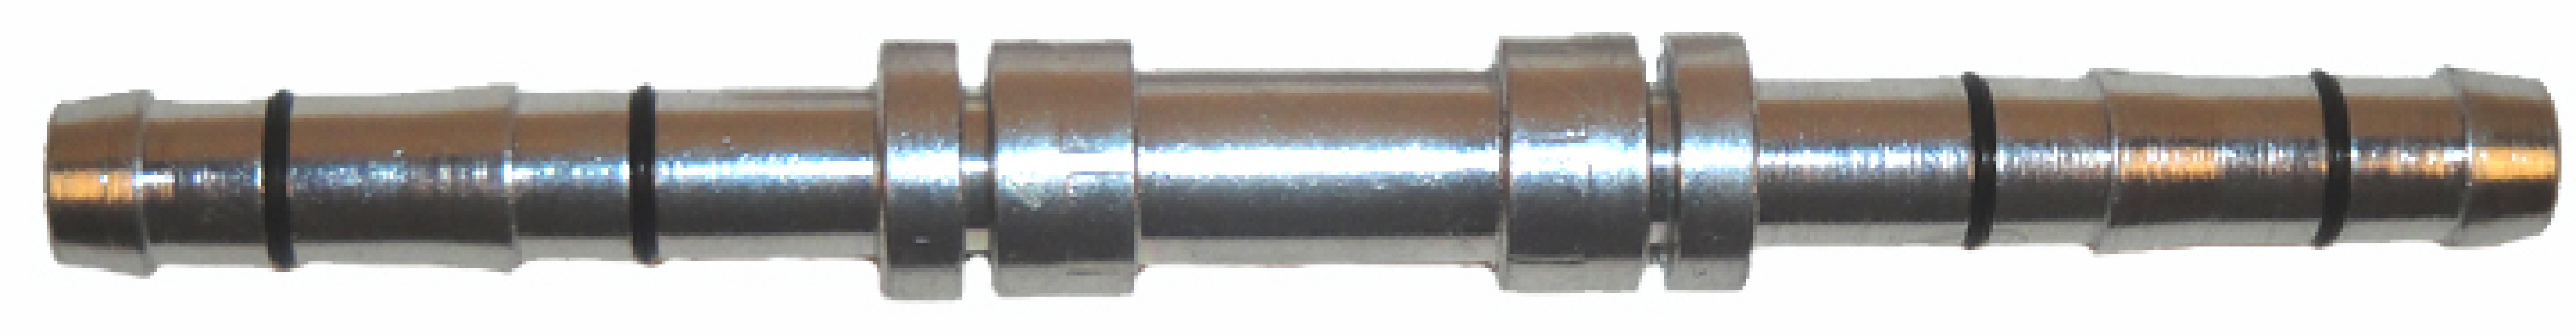 Image of A/C Refrigerant Hose Fitting from Sunair. Part number: FF14250